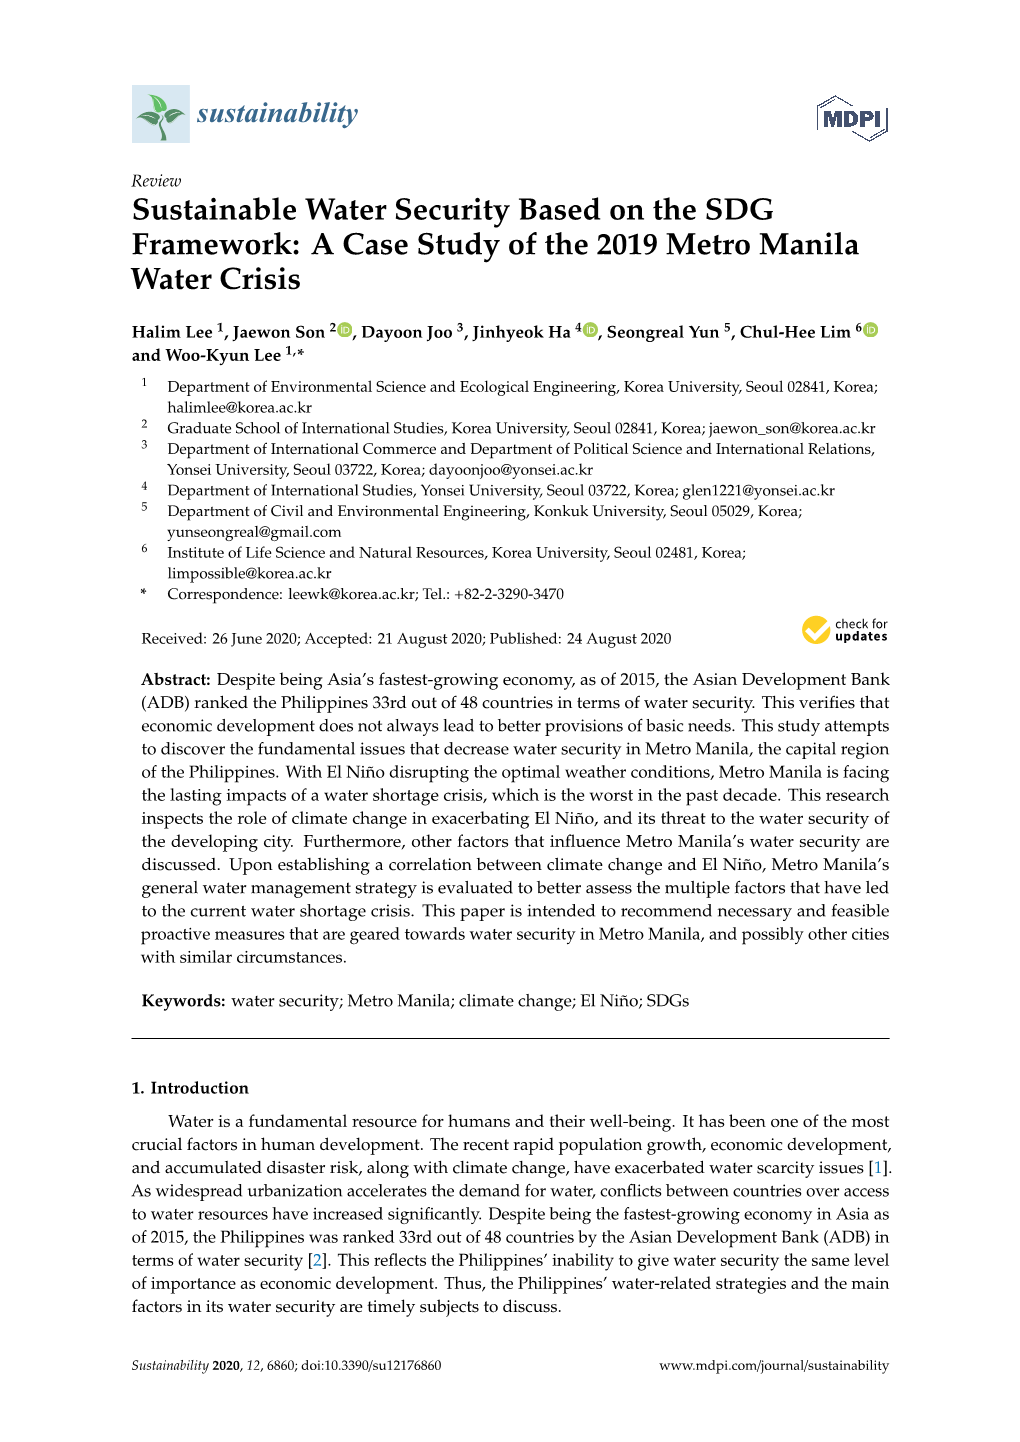 Sustainable Water Security Based on the SDG Framework: a Case Study of the 2019 Metro Manila Water Crisis